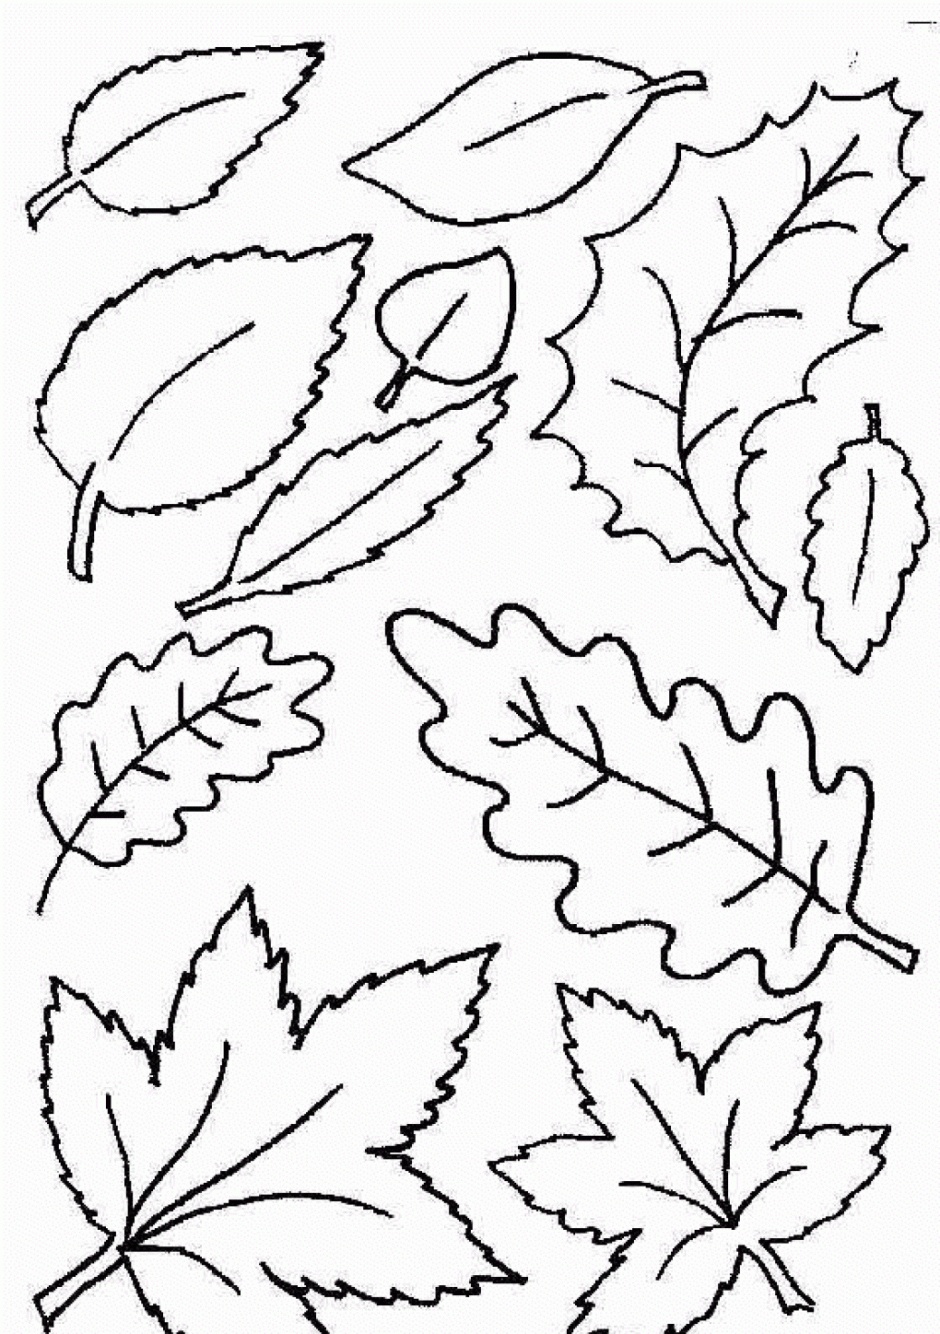 Coloring Ideas : Free Printable Leaf Coloring Pages Fall Leaves And - Free Printable Pictures Of Autumn Leaves